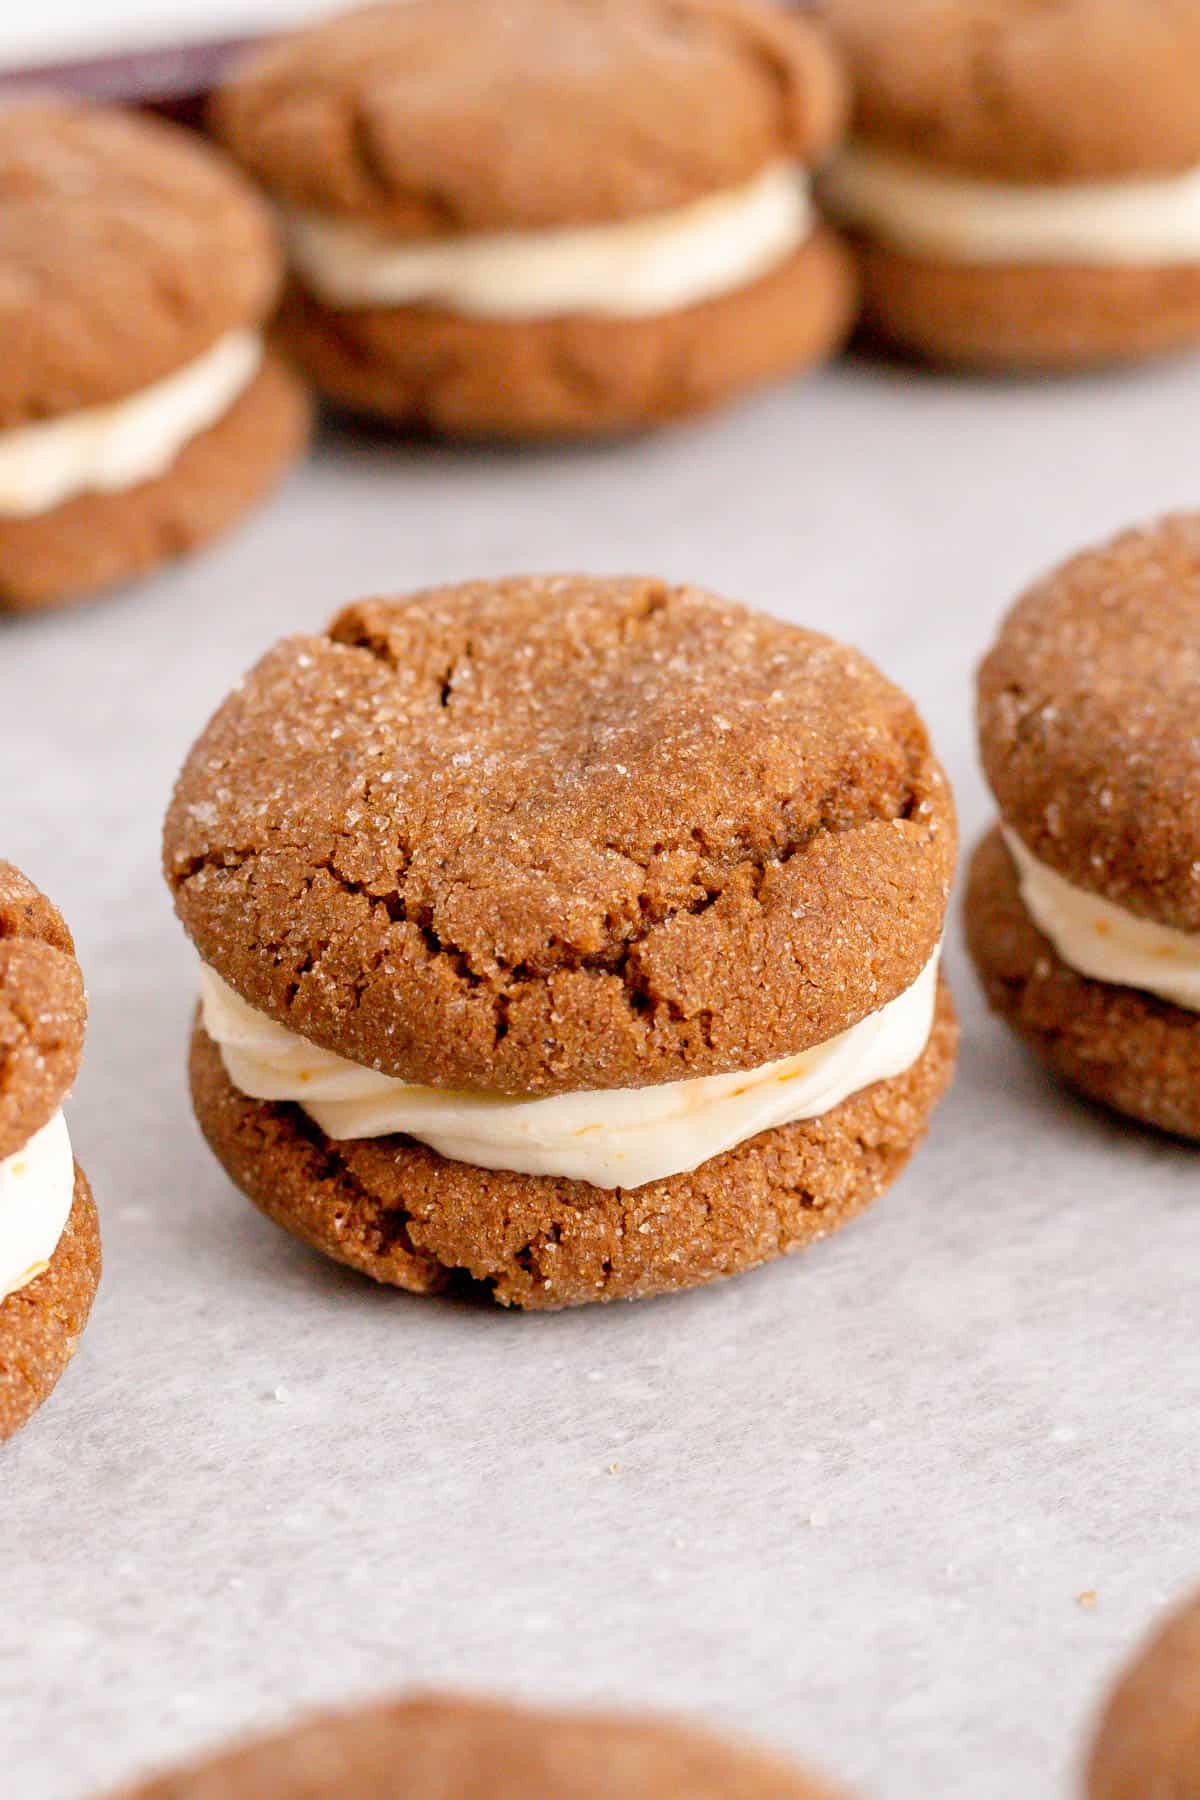 A close-up of a ginger cookie sandwich filled with orange cream frosting on parchment paper